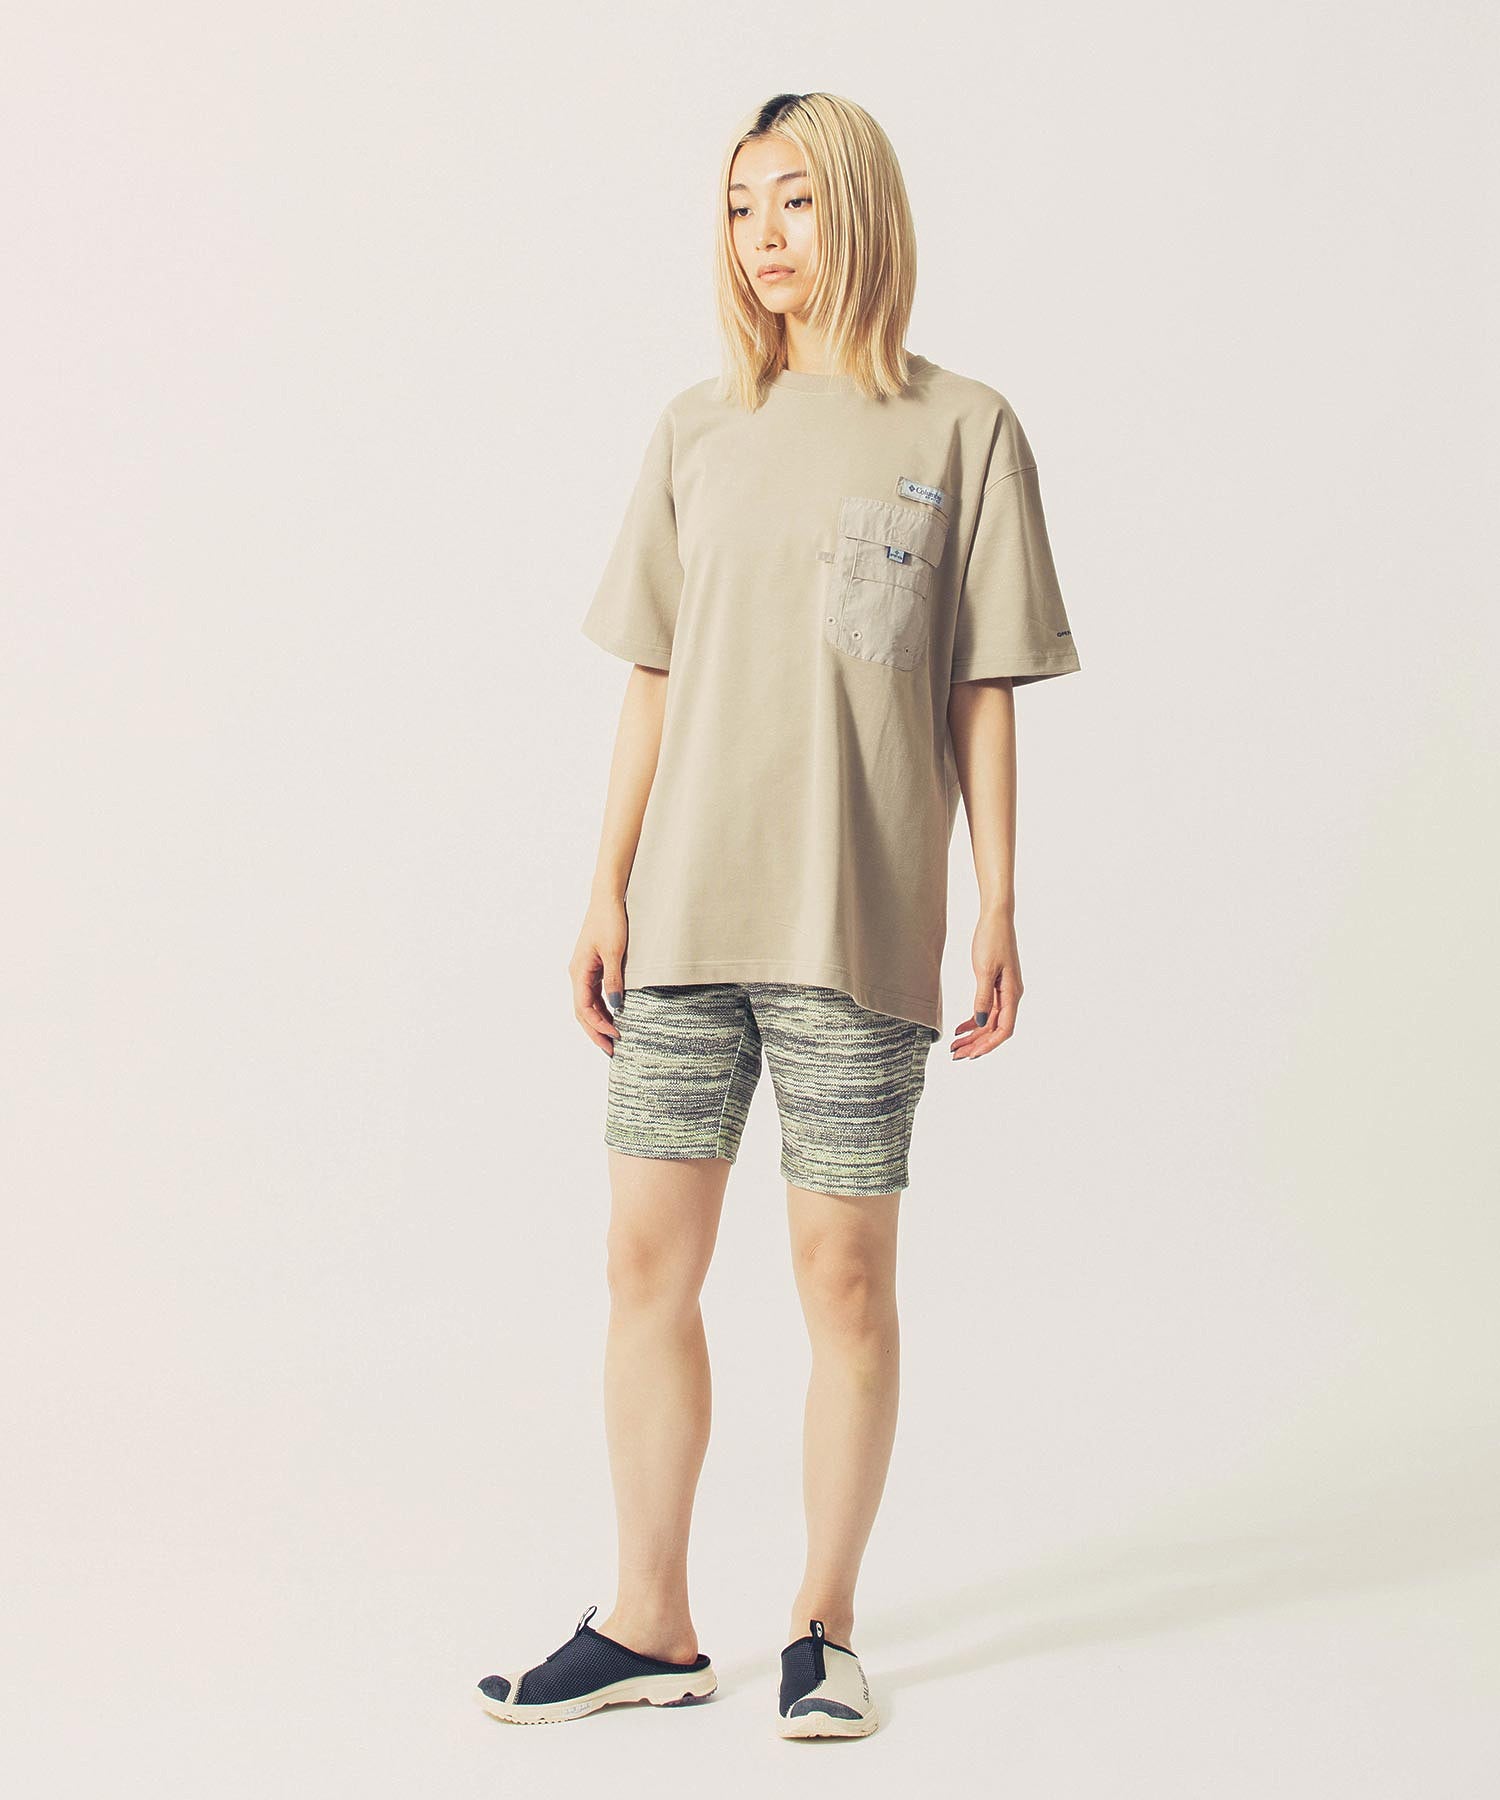 THE OPEN PRODUCT /ザオープンプロダクト/ PRINTED FITTED SHORTS GTO221PT003